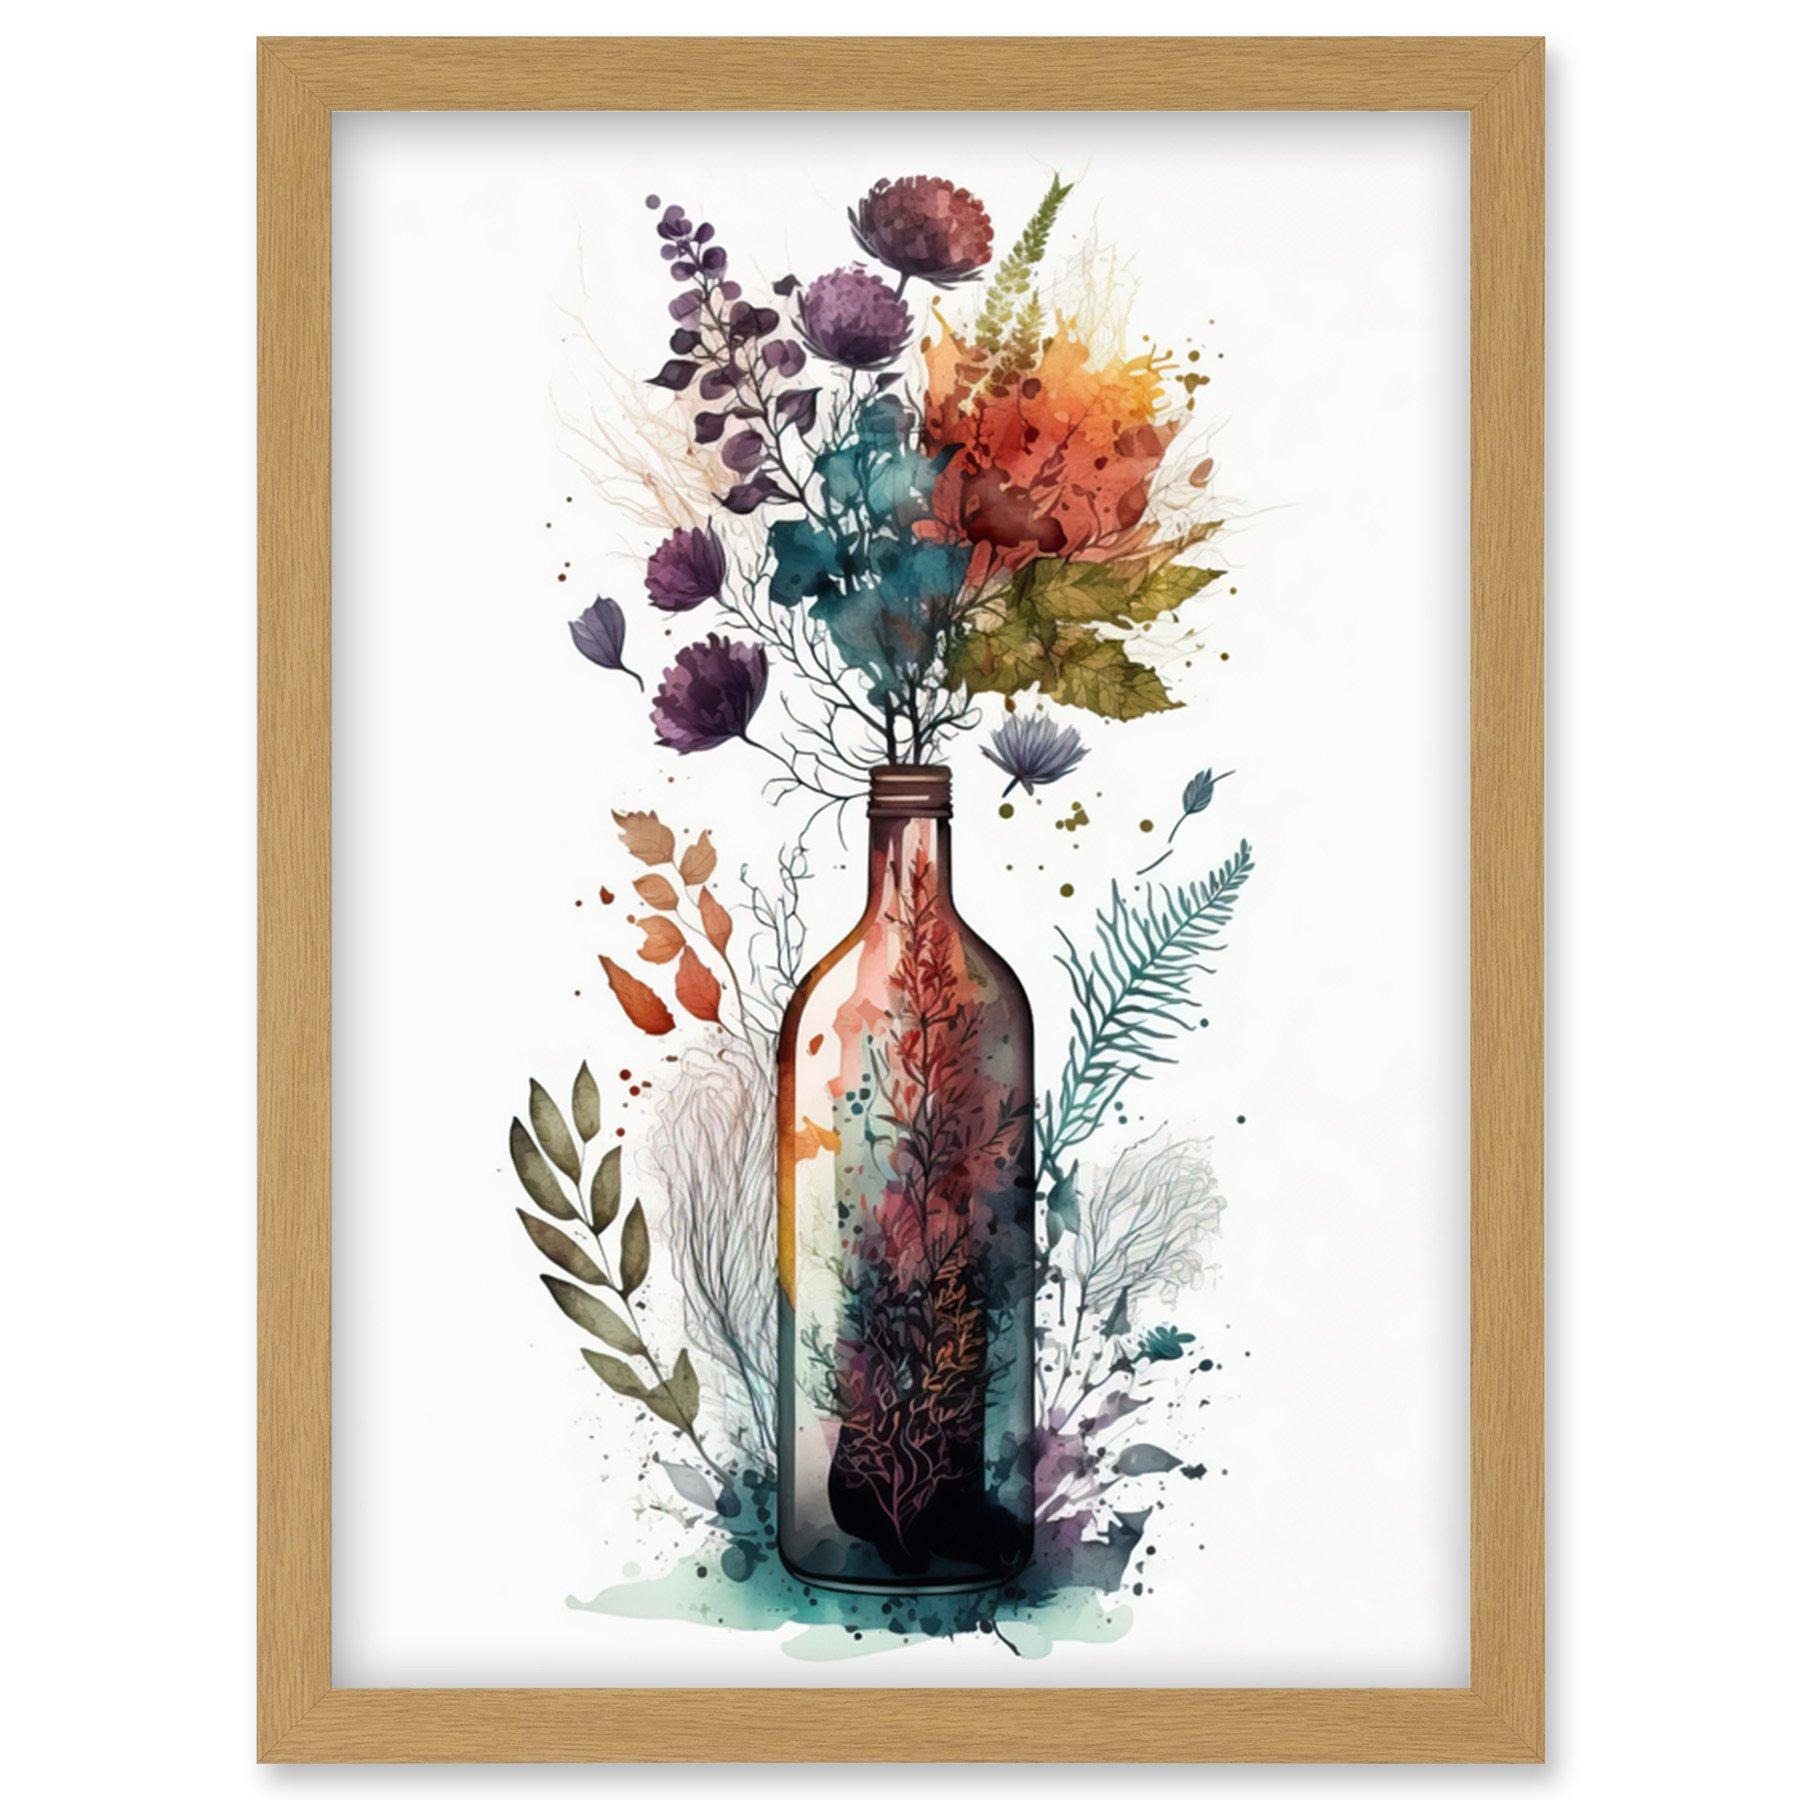 Wine Bottle with Wildflower Floral Spring Bouquet Artwork Framed Wall Art Print A4 - image 1